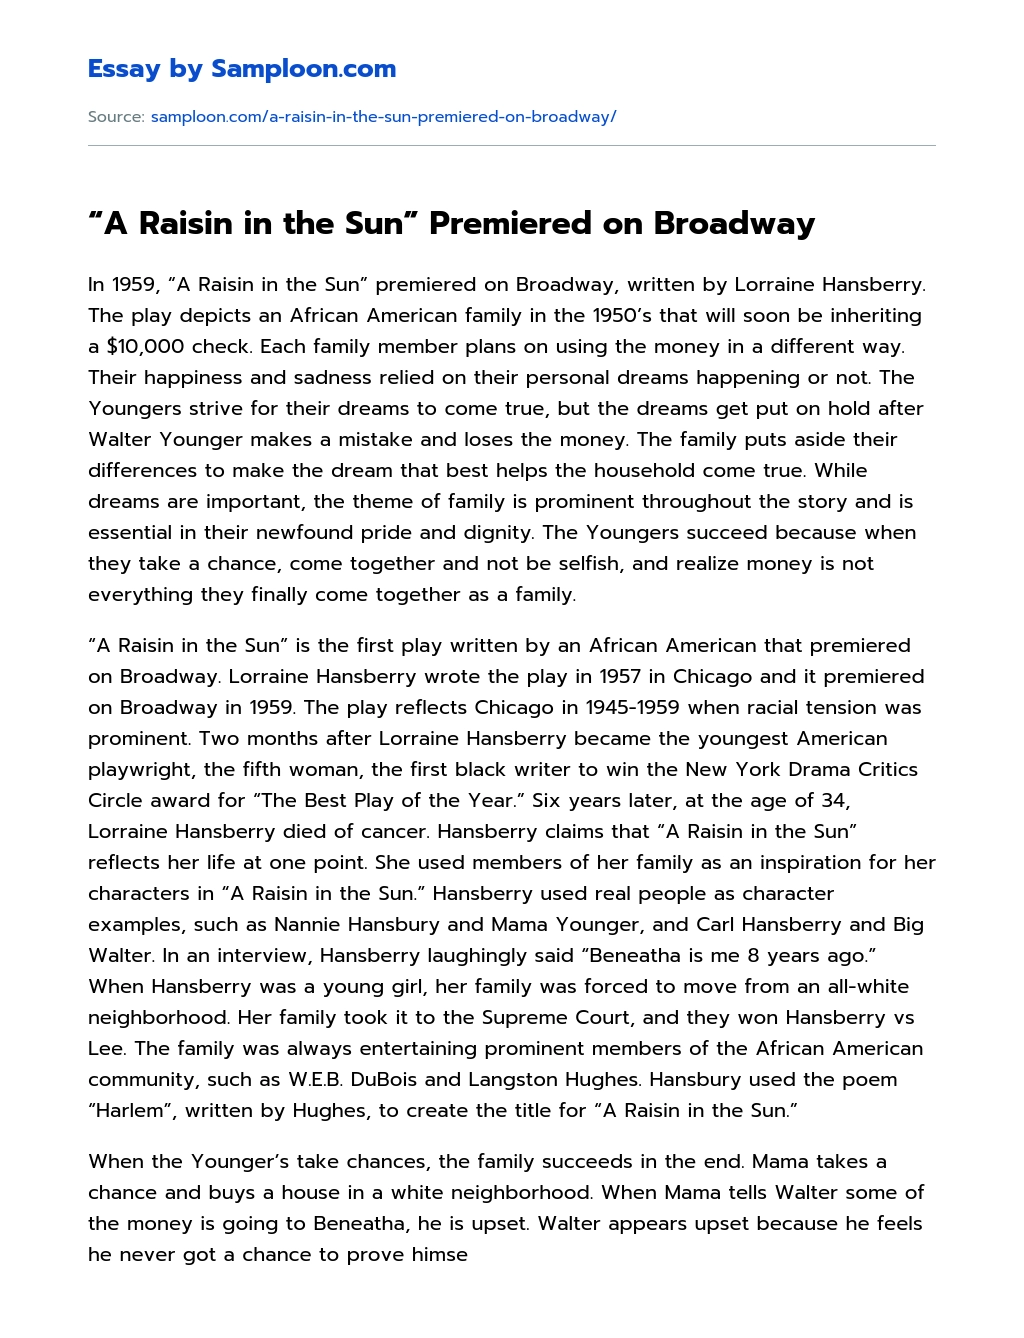 “A Raisin in the Sun” Premiered on Broadway essay